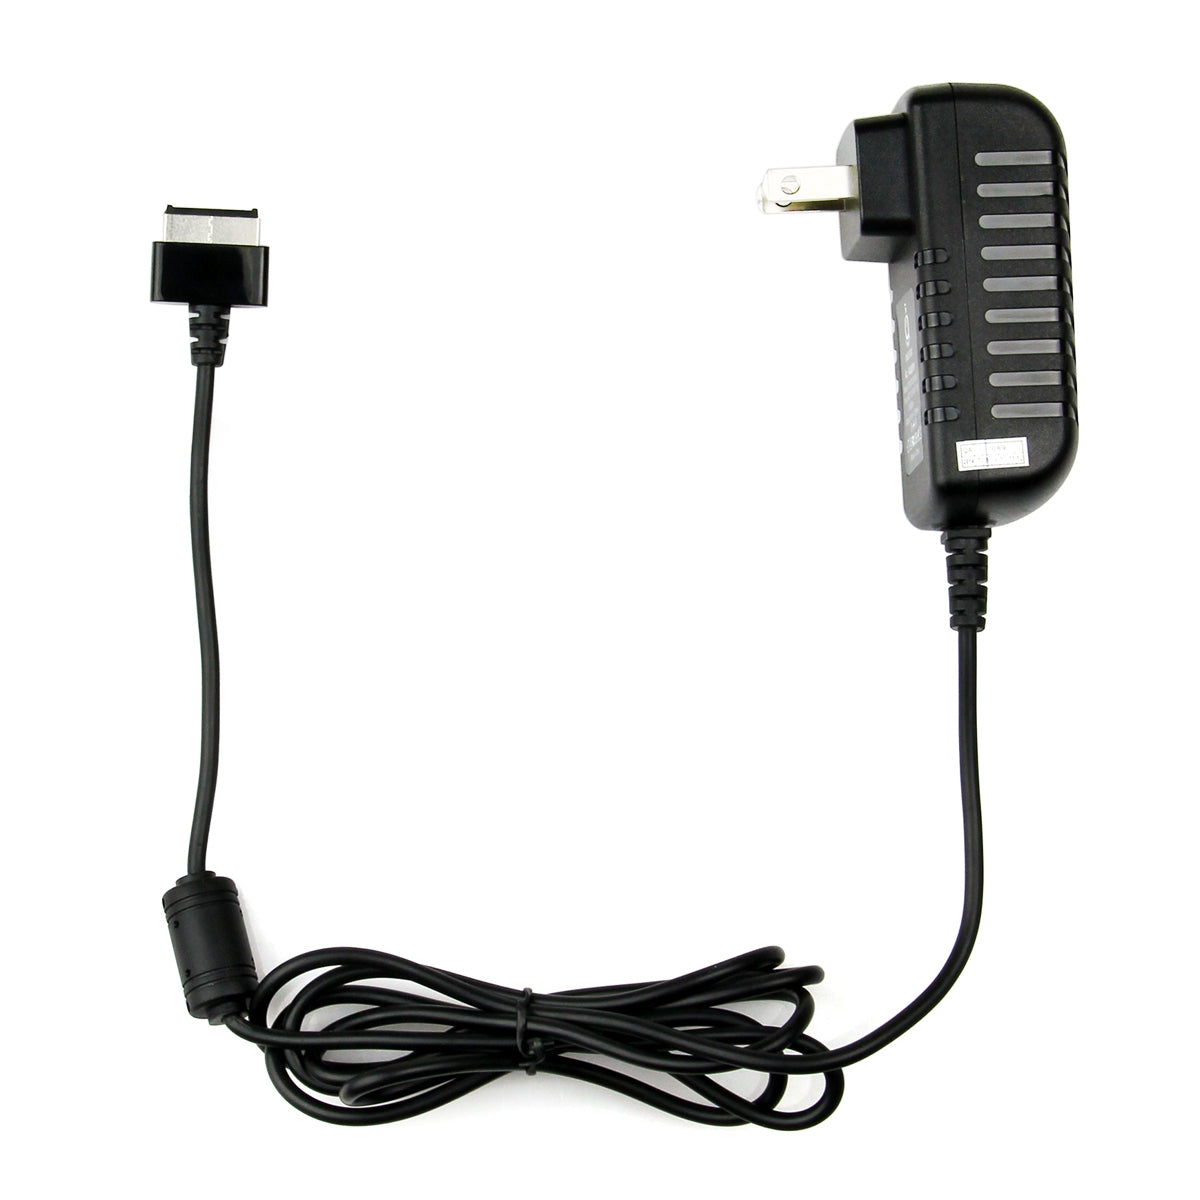 AC Adapter Charger for ASUS TF101-X1 Tablet.